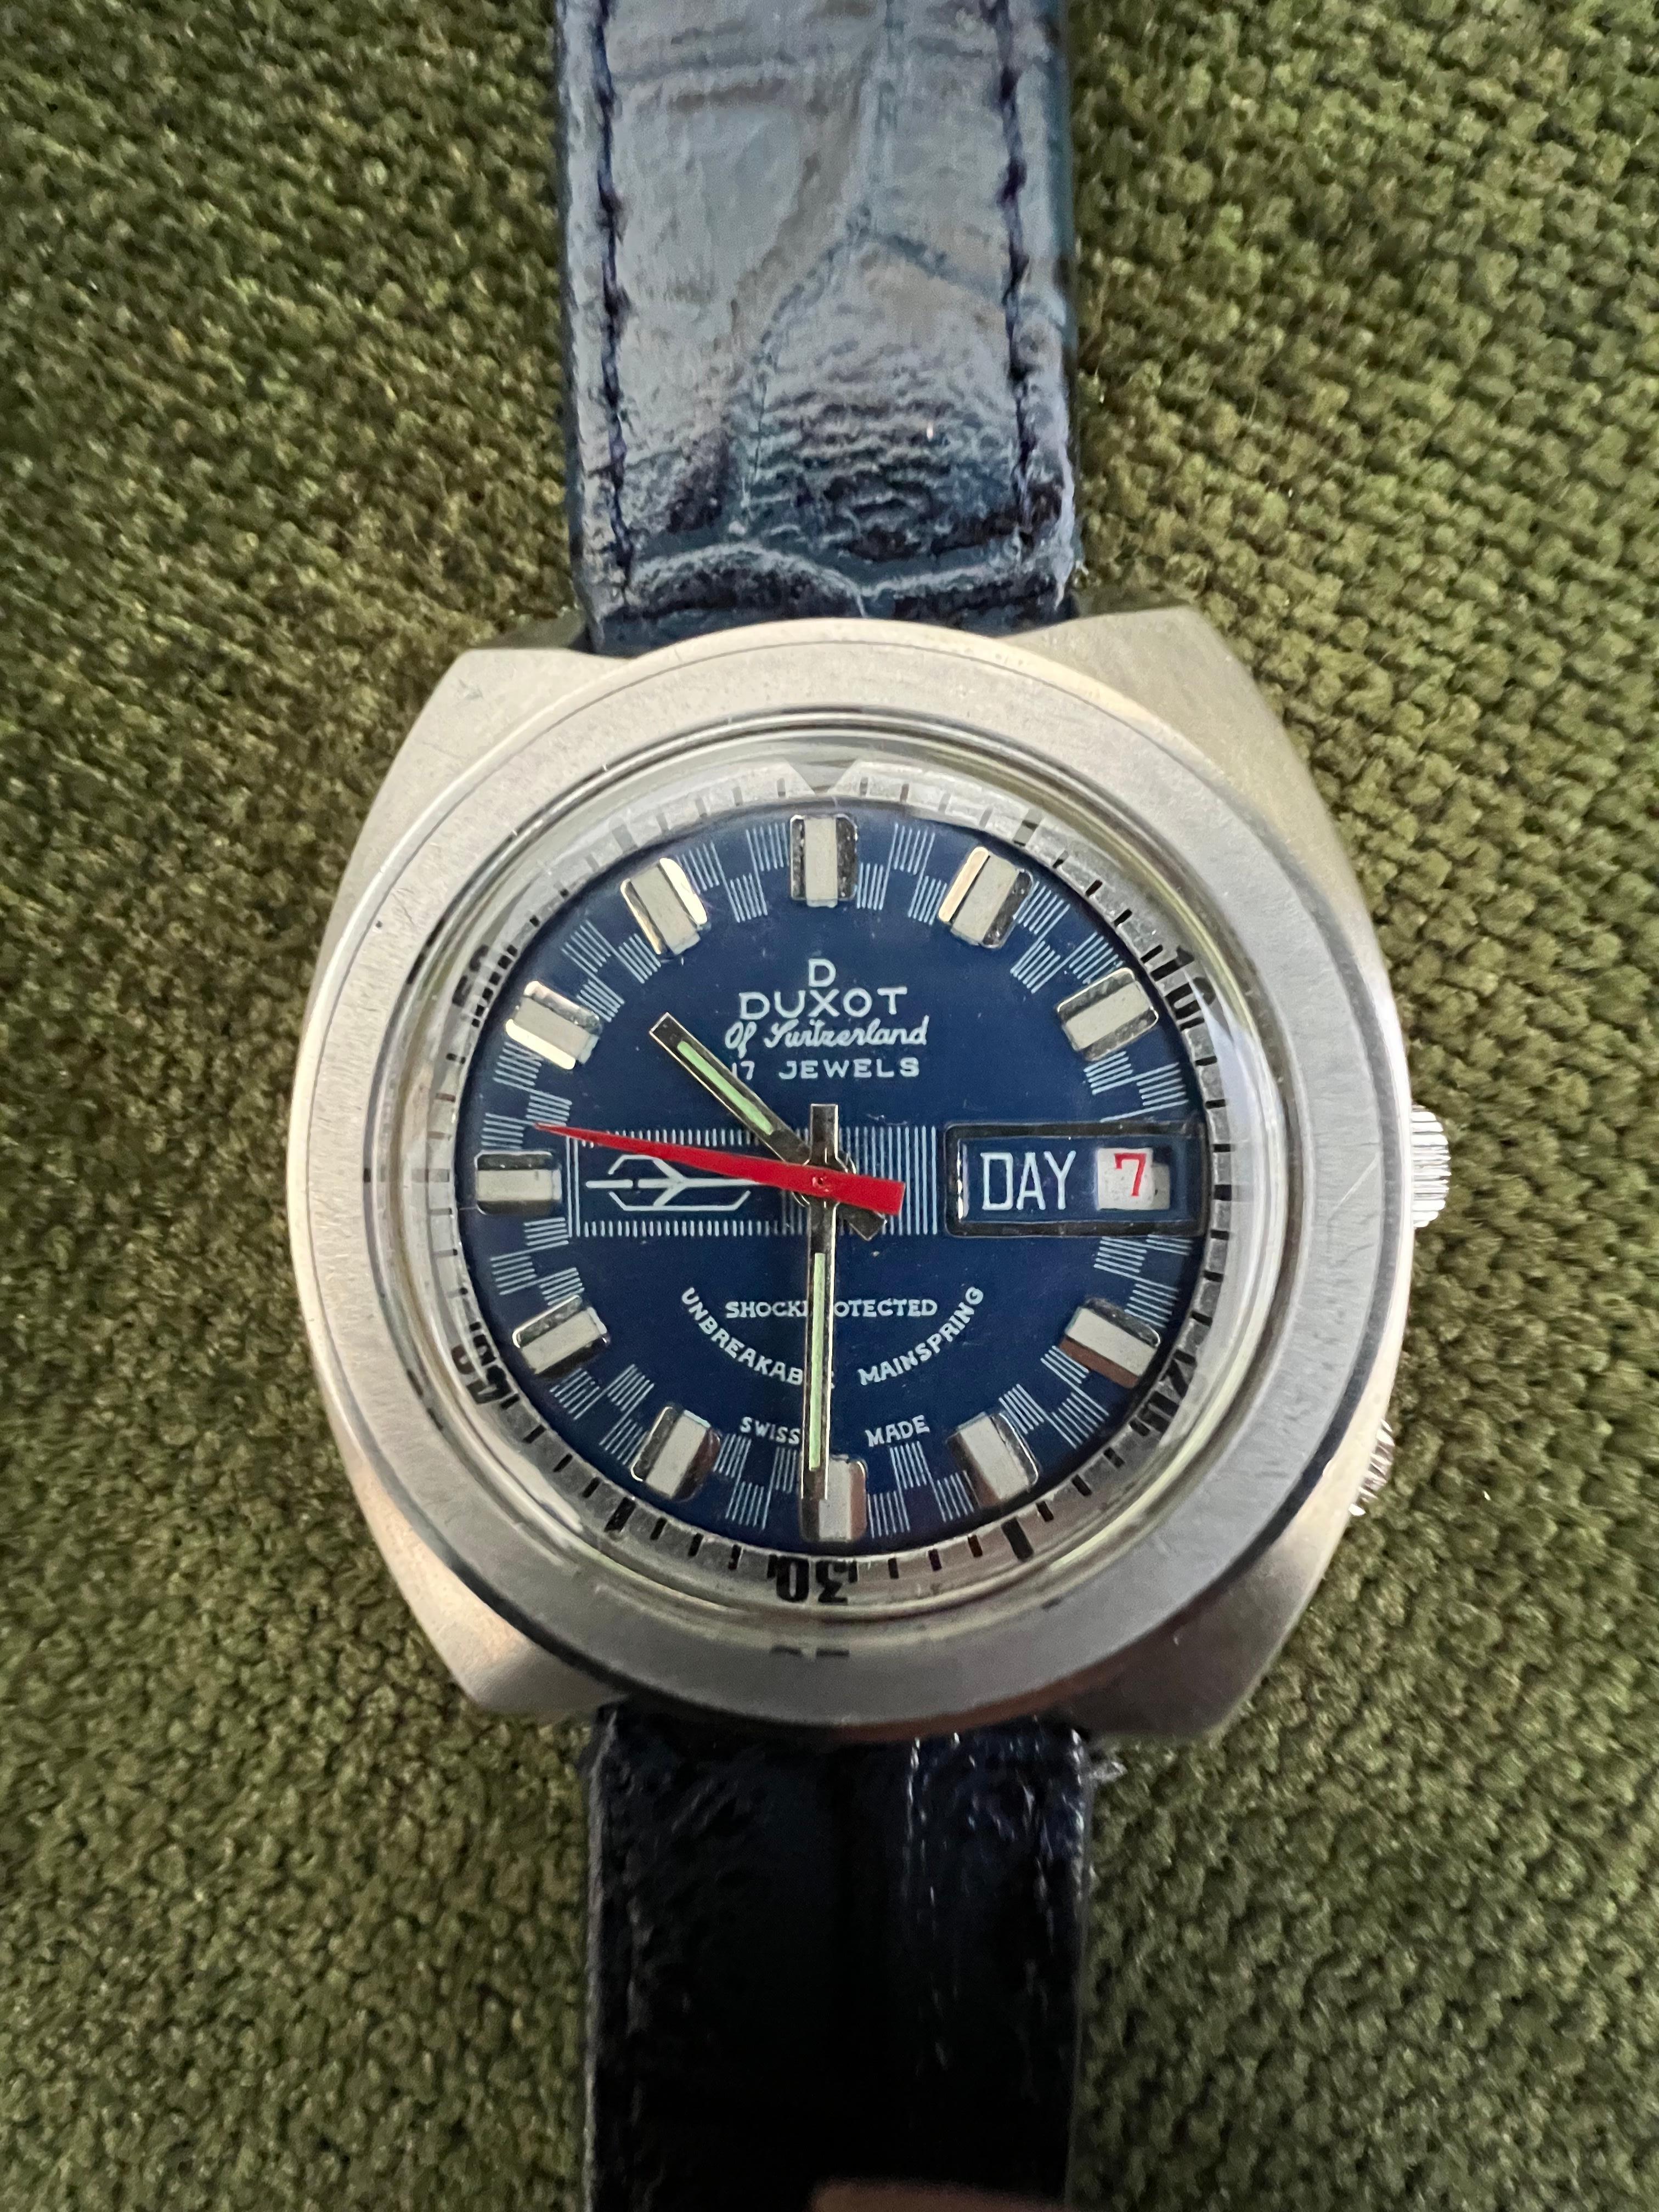 Blue 70s DUXOT OF SWITZERLAND 2 Dial - Airman STYLE CASE.
In amazing super condition. 
I love the 70s retro look on this sporty watch and I love the fact that it is in mint condition. 
CASE: LARGE ALL-STEEL CASE MEASURING A ROBUST 40mm ACROSS  NOT